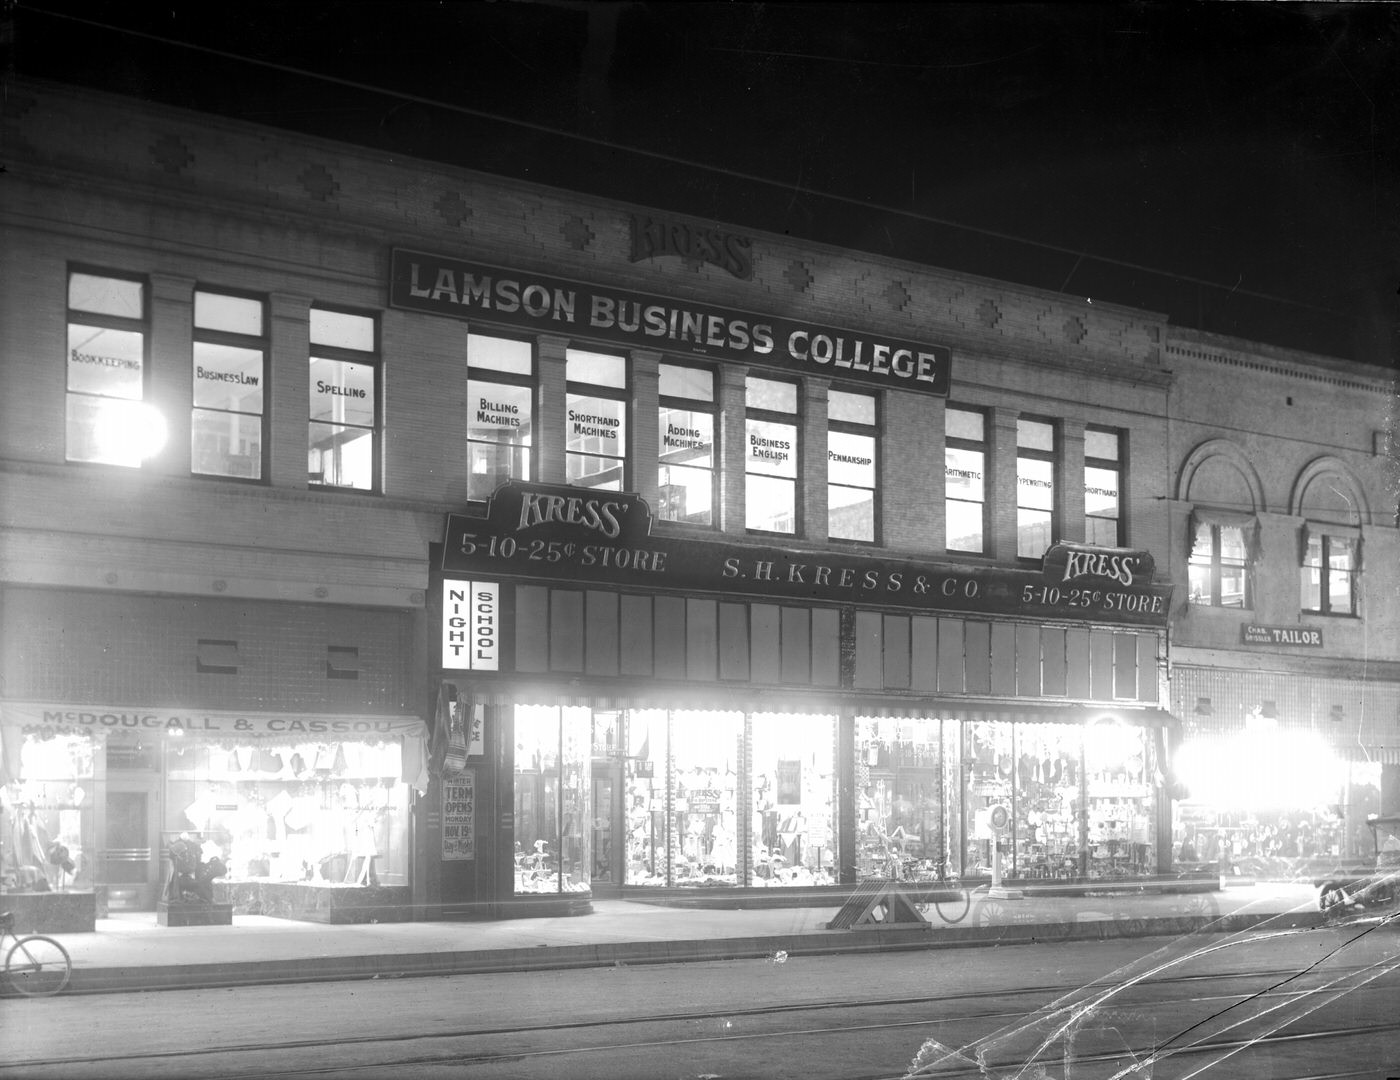 Lamson Business College, 1930s. This college was located at Adams and Monroe in Phoenix.